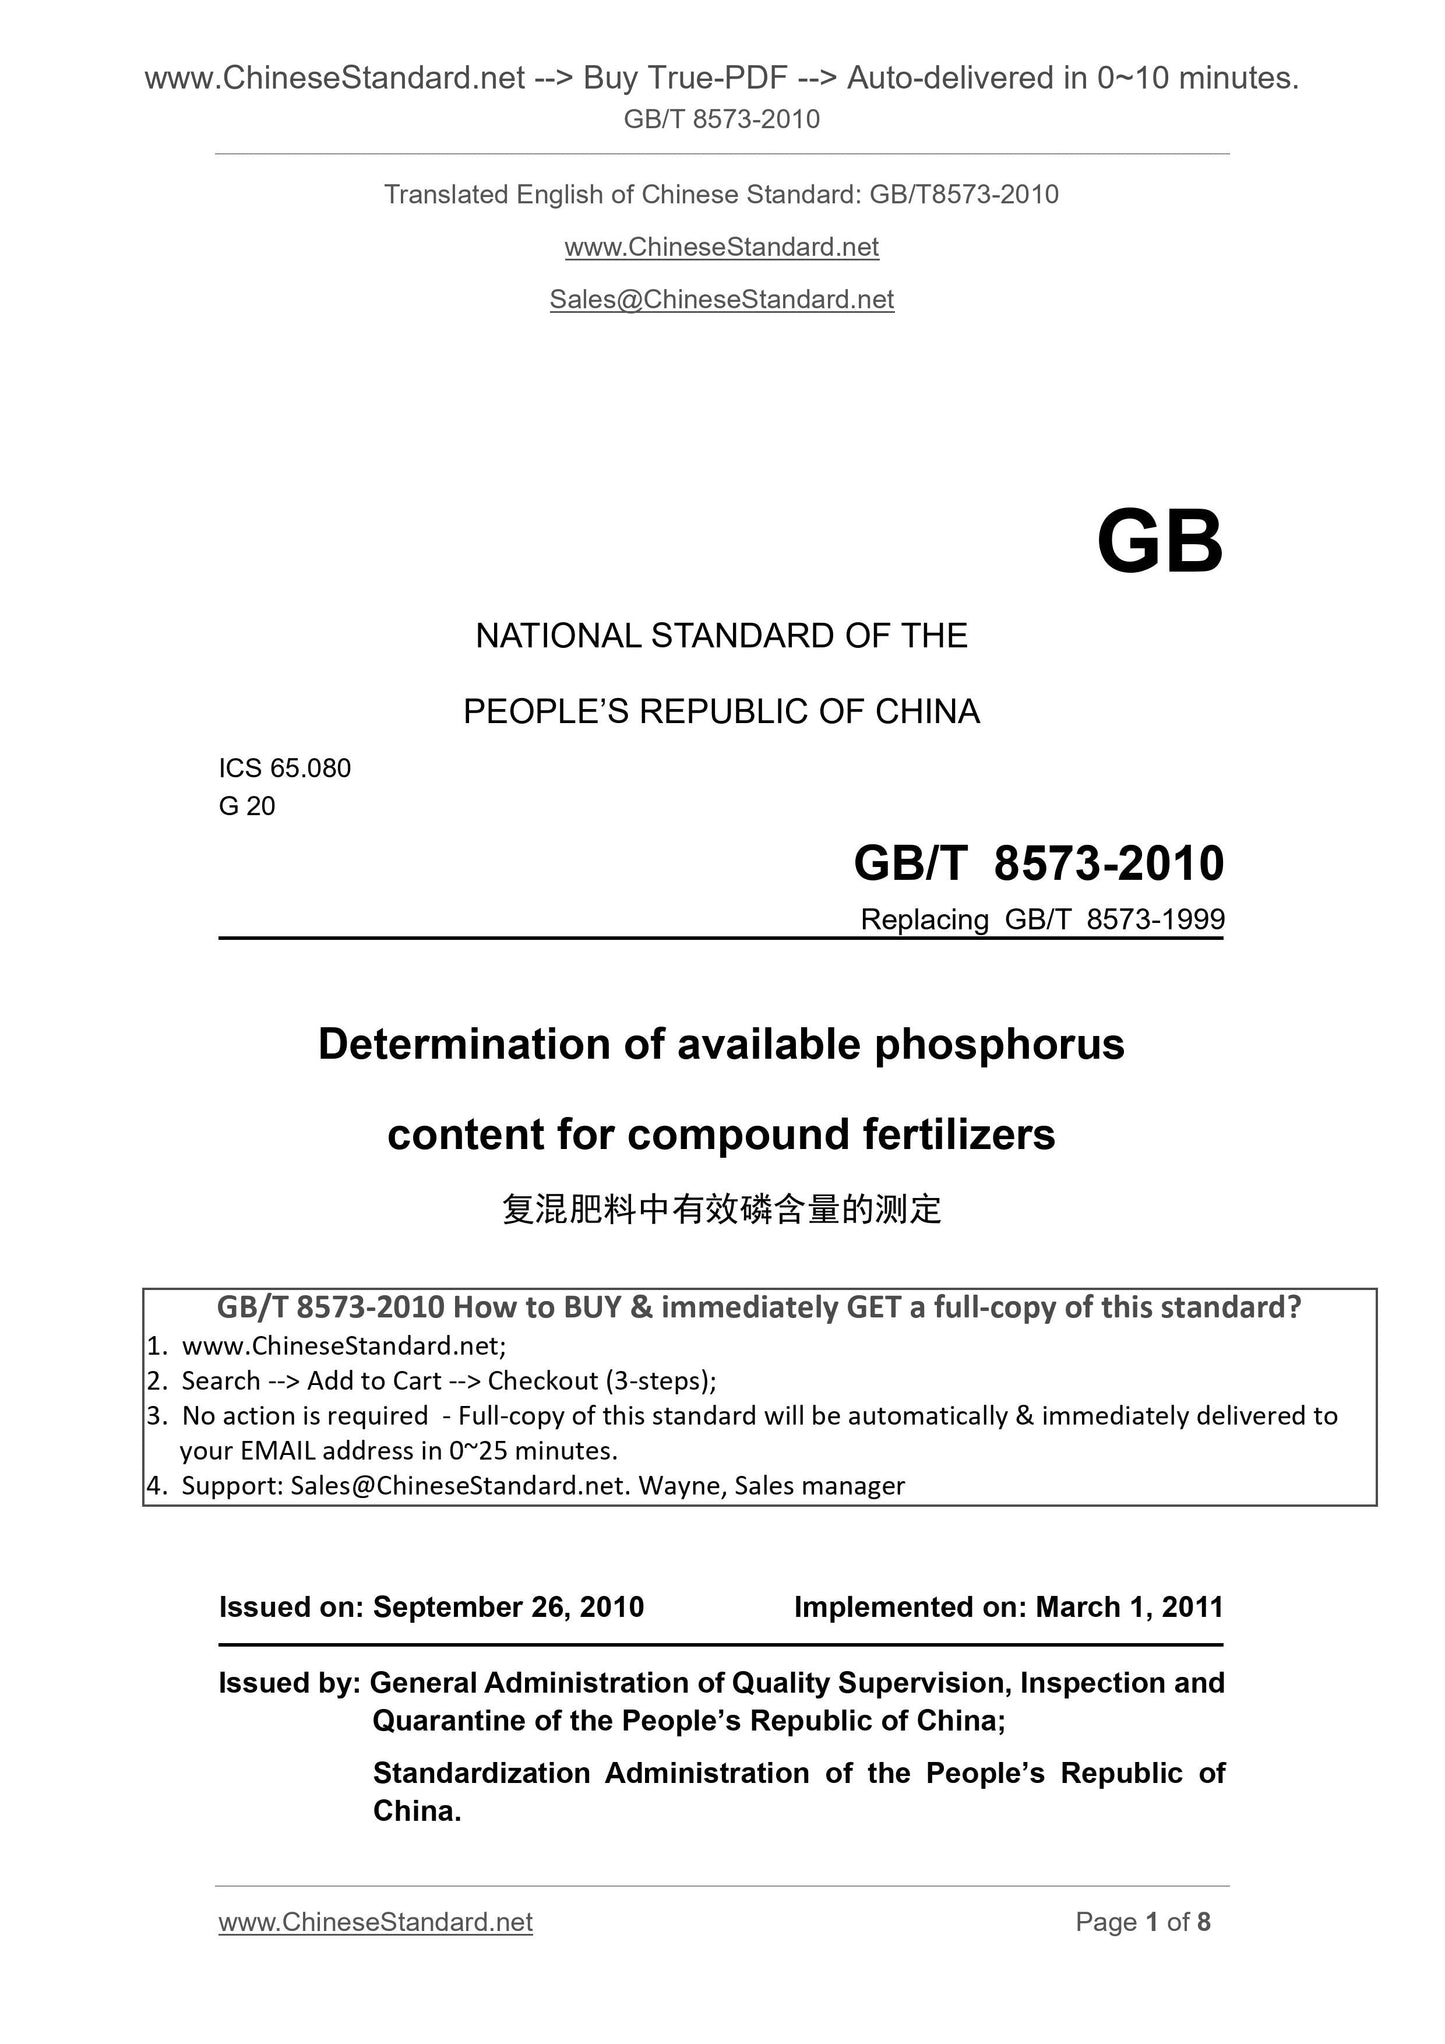 GB/T 8573-2010 Page 1